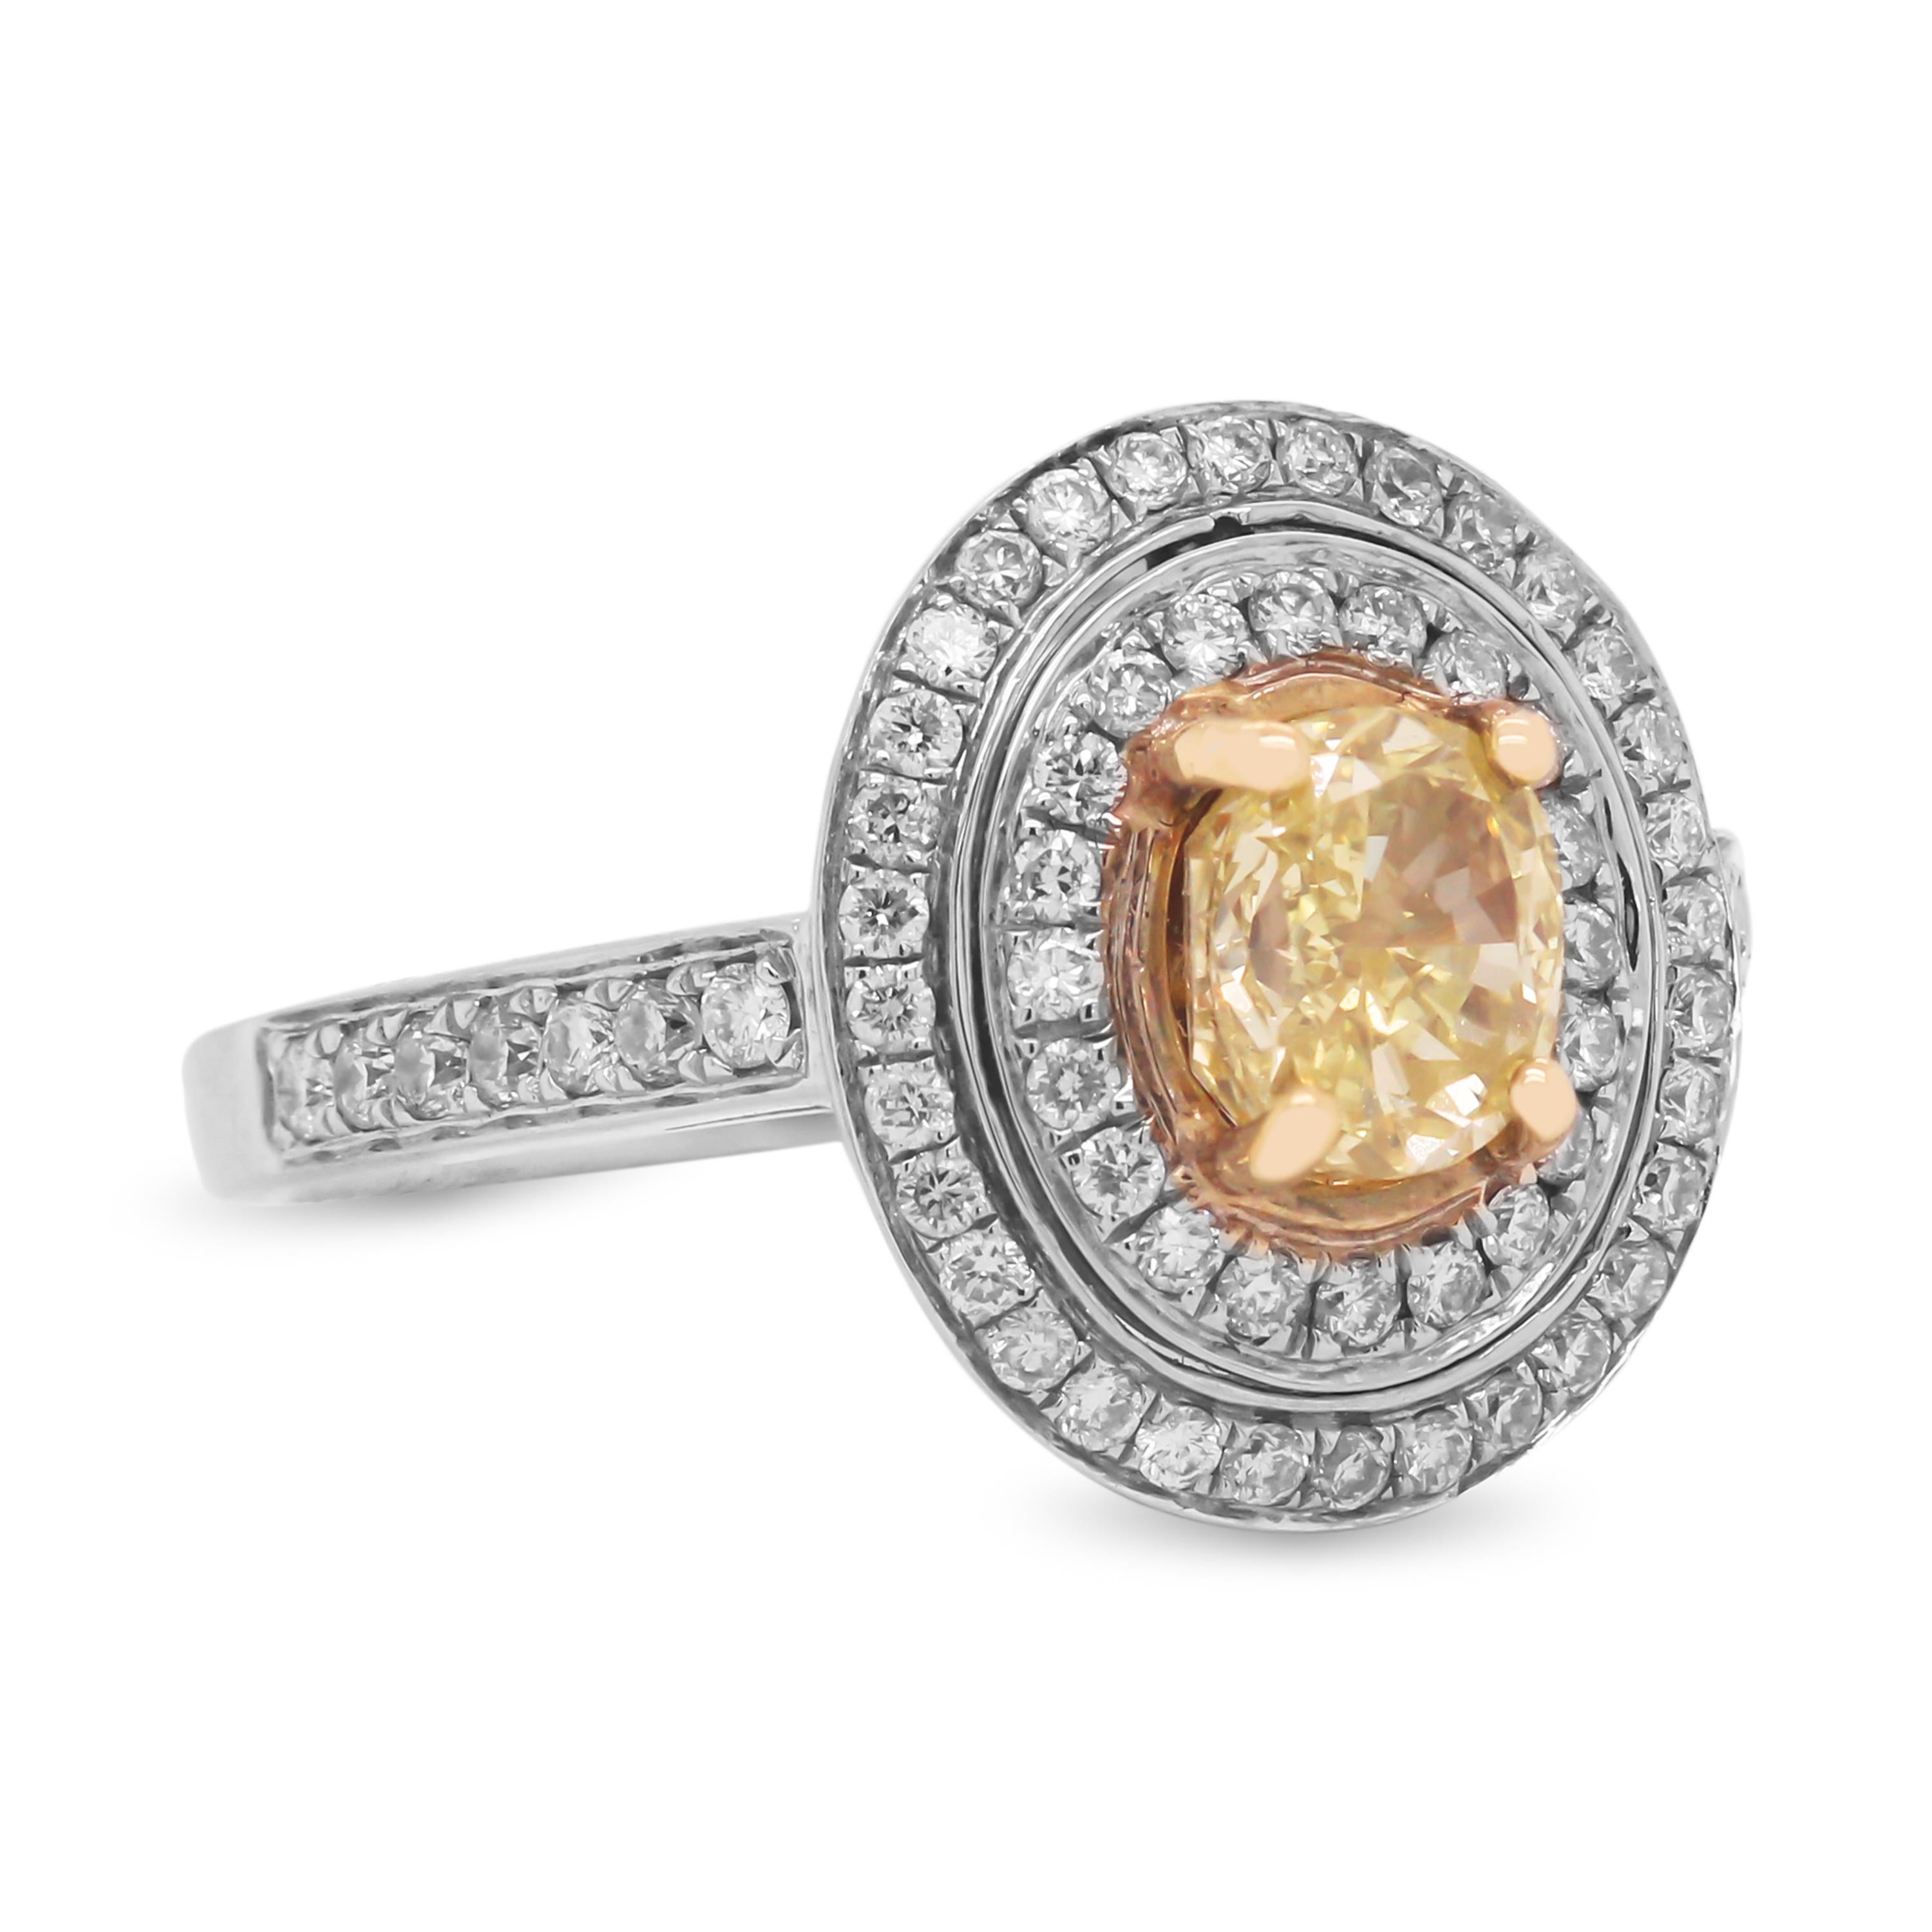 GIA 1.06 Carat VS1 Fancy Intense Yellow Diamond Ring with Diamonds Set in 18K White Gold

This oval Fancy Intense Yellow Diamond is a beautiful everyday ring with its natural beauty. Double halo mounting set with two rows of diamonds along with half